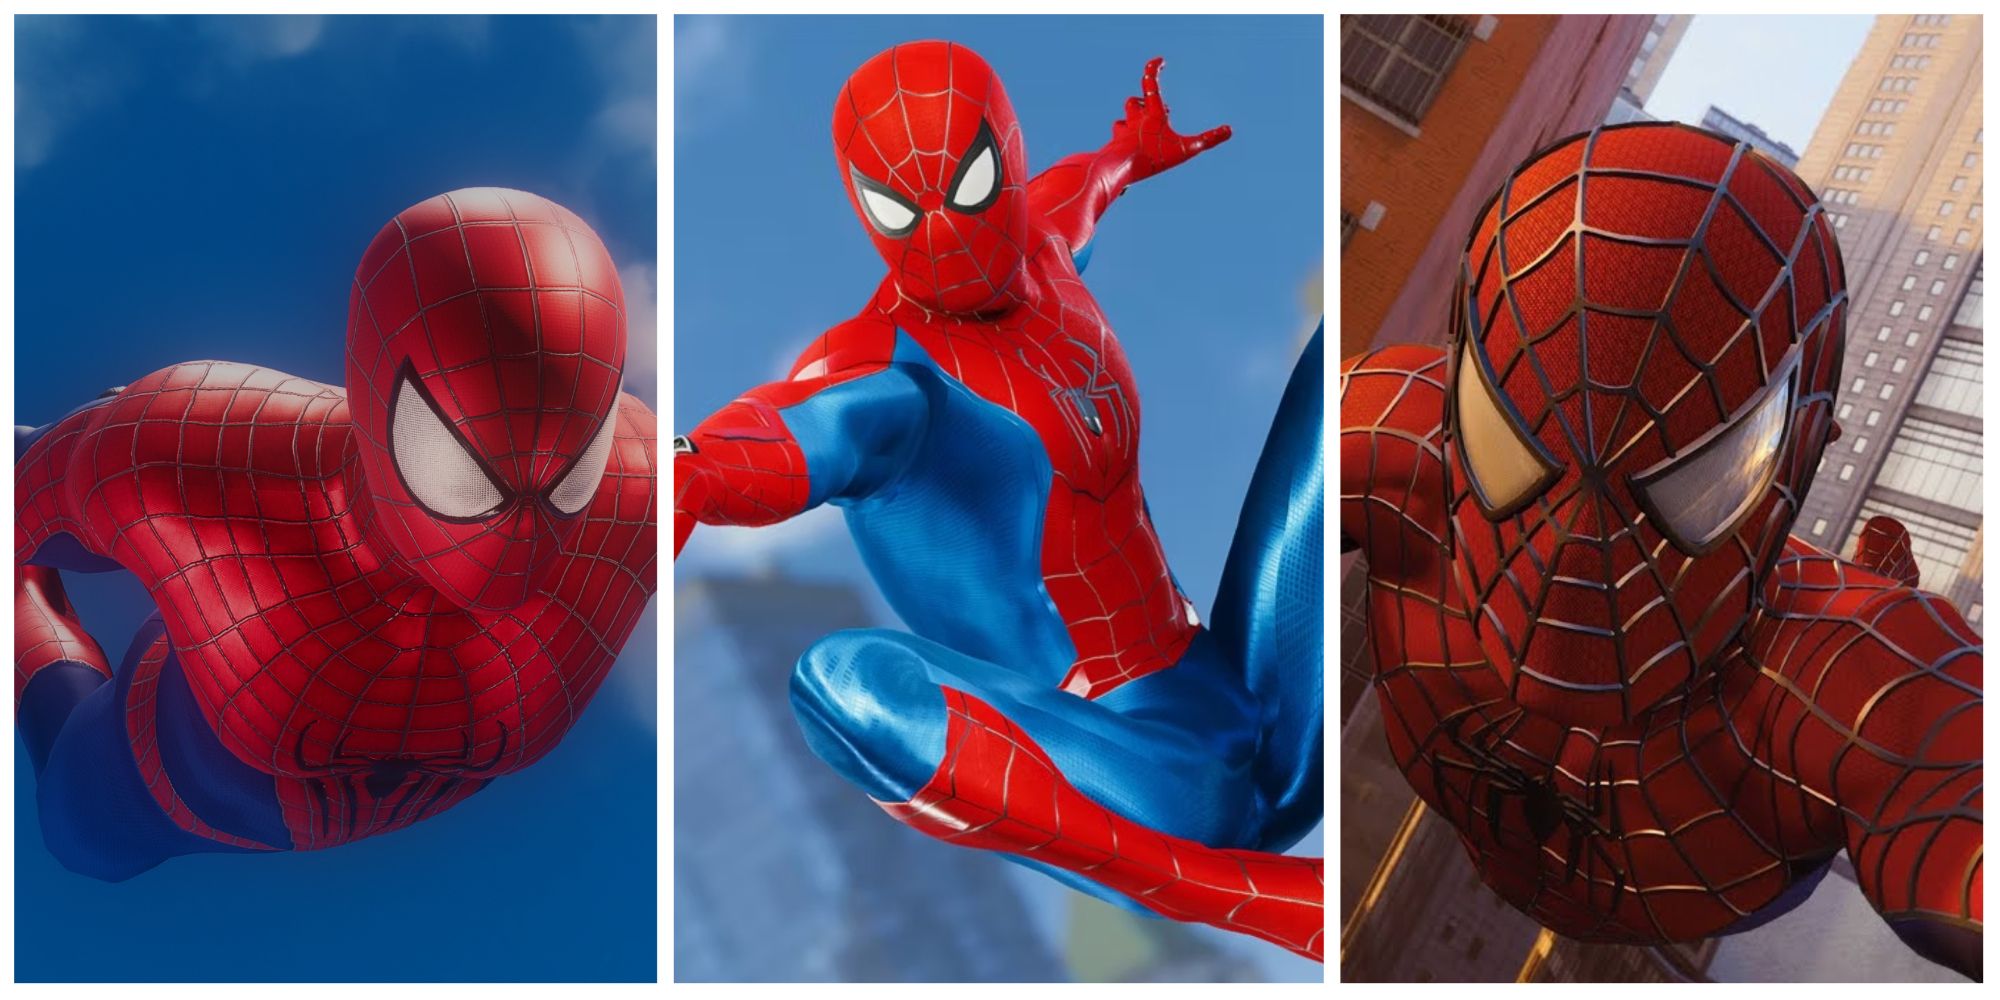 Marvel's Spider-Man Remastered: Suit Mods We Need PC Players To Make